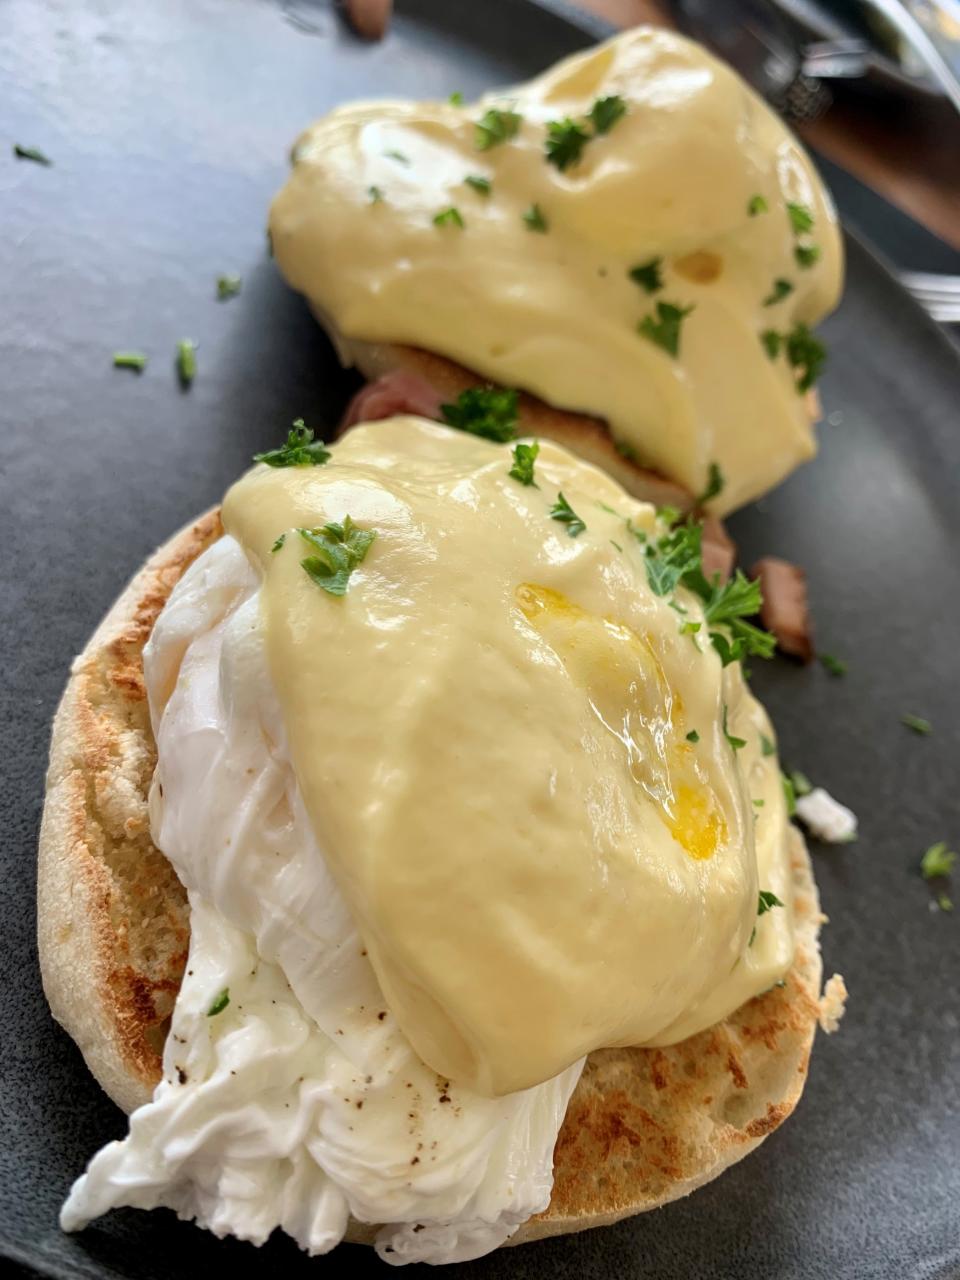 The Eggs a la Benedick (eggs Benedict) at Le French Restaurant in Indian Harbour Beach were splendid, probably the best version of them available in the area, with pale, lemony, house-made Hollandaise and perfectly poached eggs.